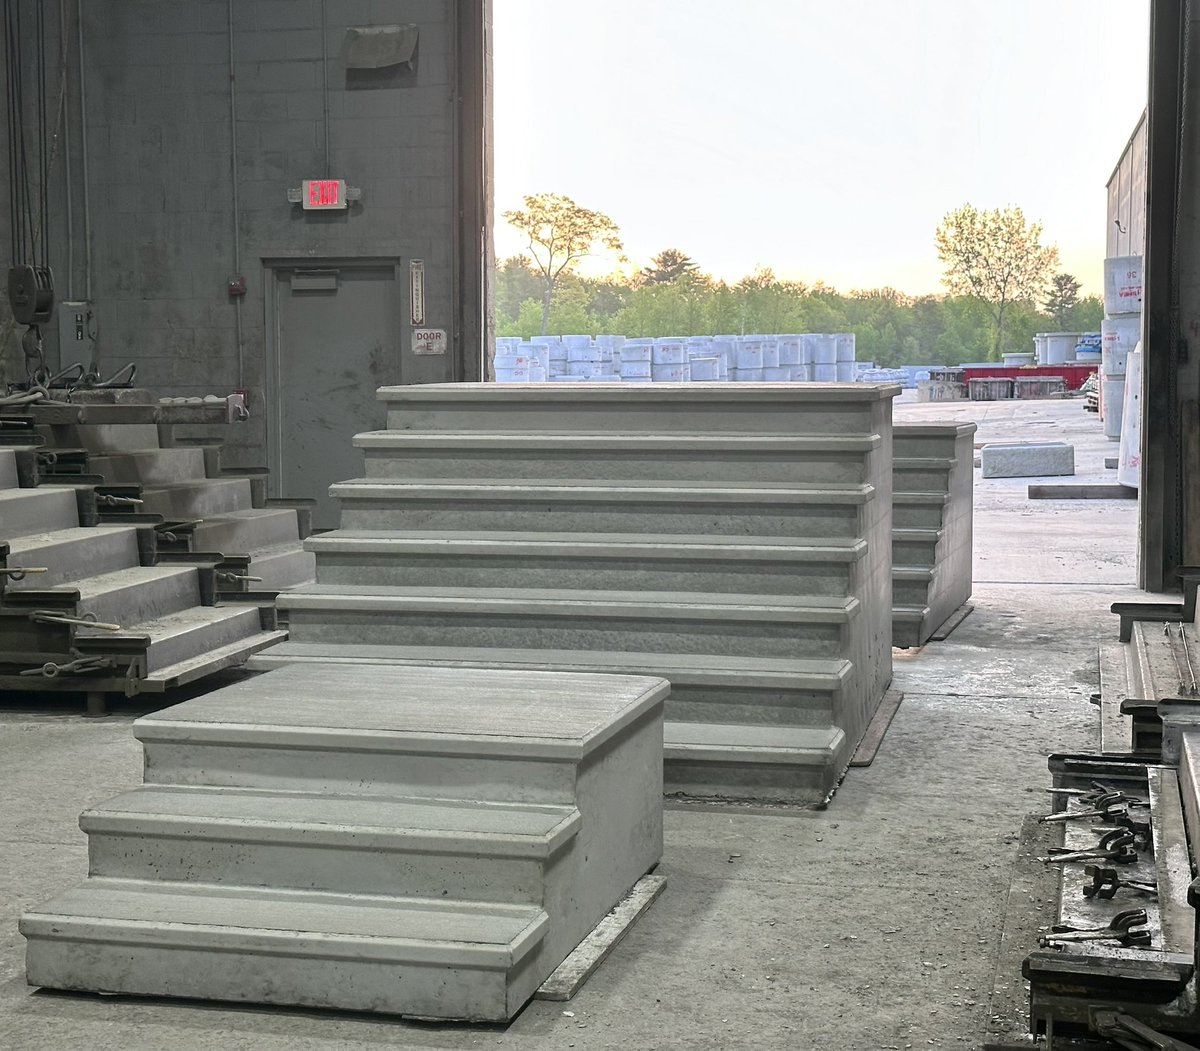 Consistency is what transforms average into excellence 👍 … Hot off the press with these precast concrete steps 🇺🇸 … Teamwork makes the dream work #may2024 #precastconcrete #thesheaway #precaststairs #madeintheusa🇺🇸 #teamworkmakesthedreamwork